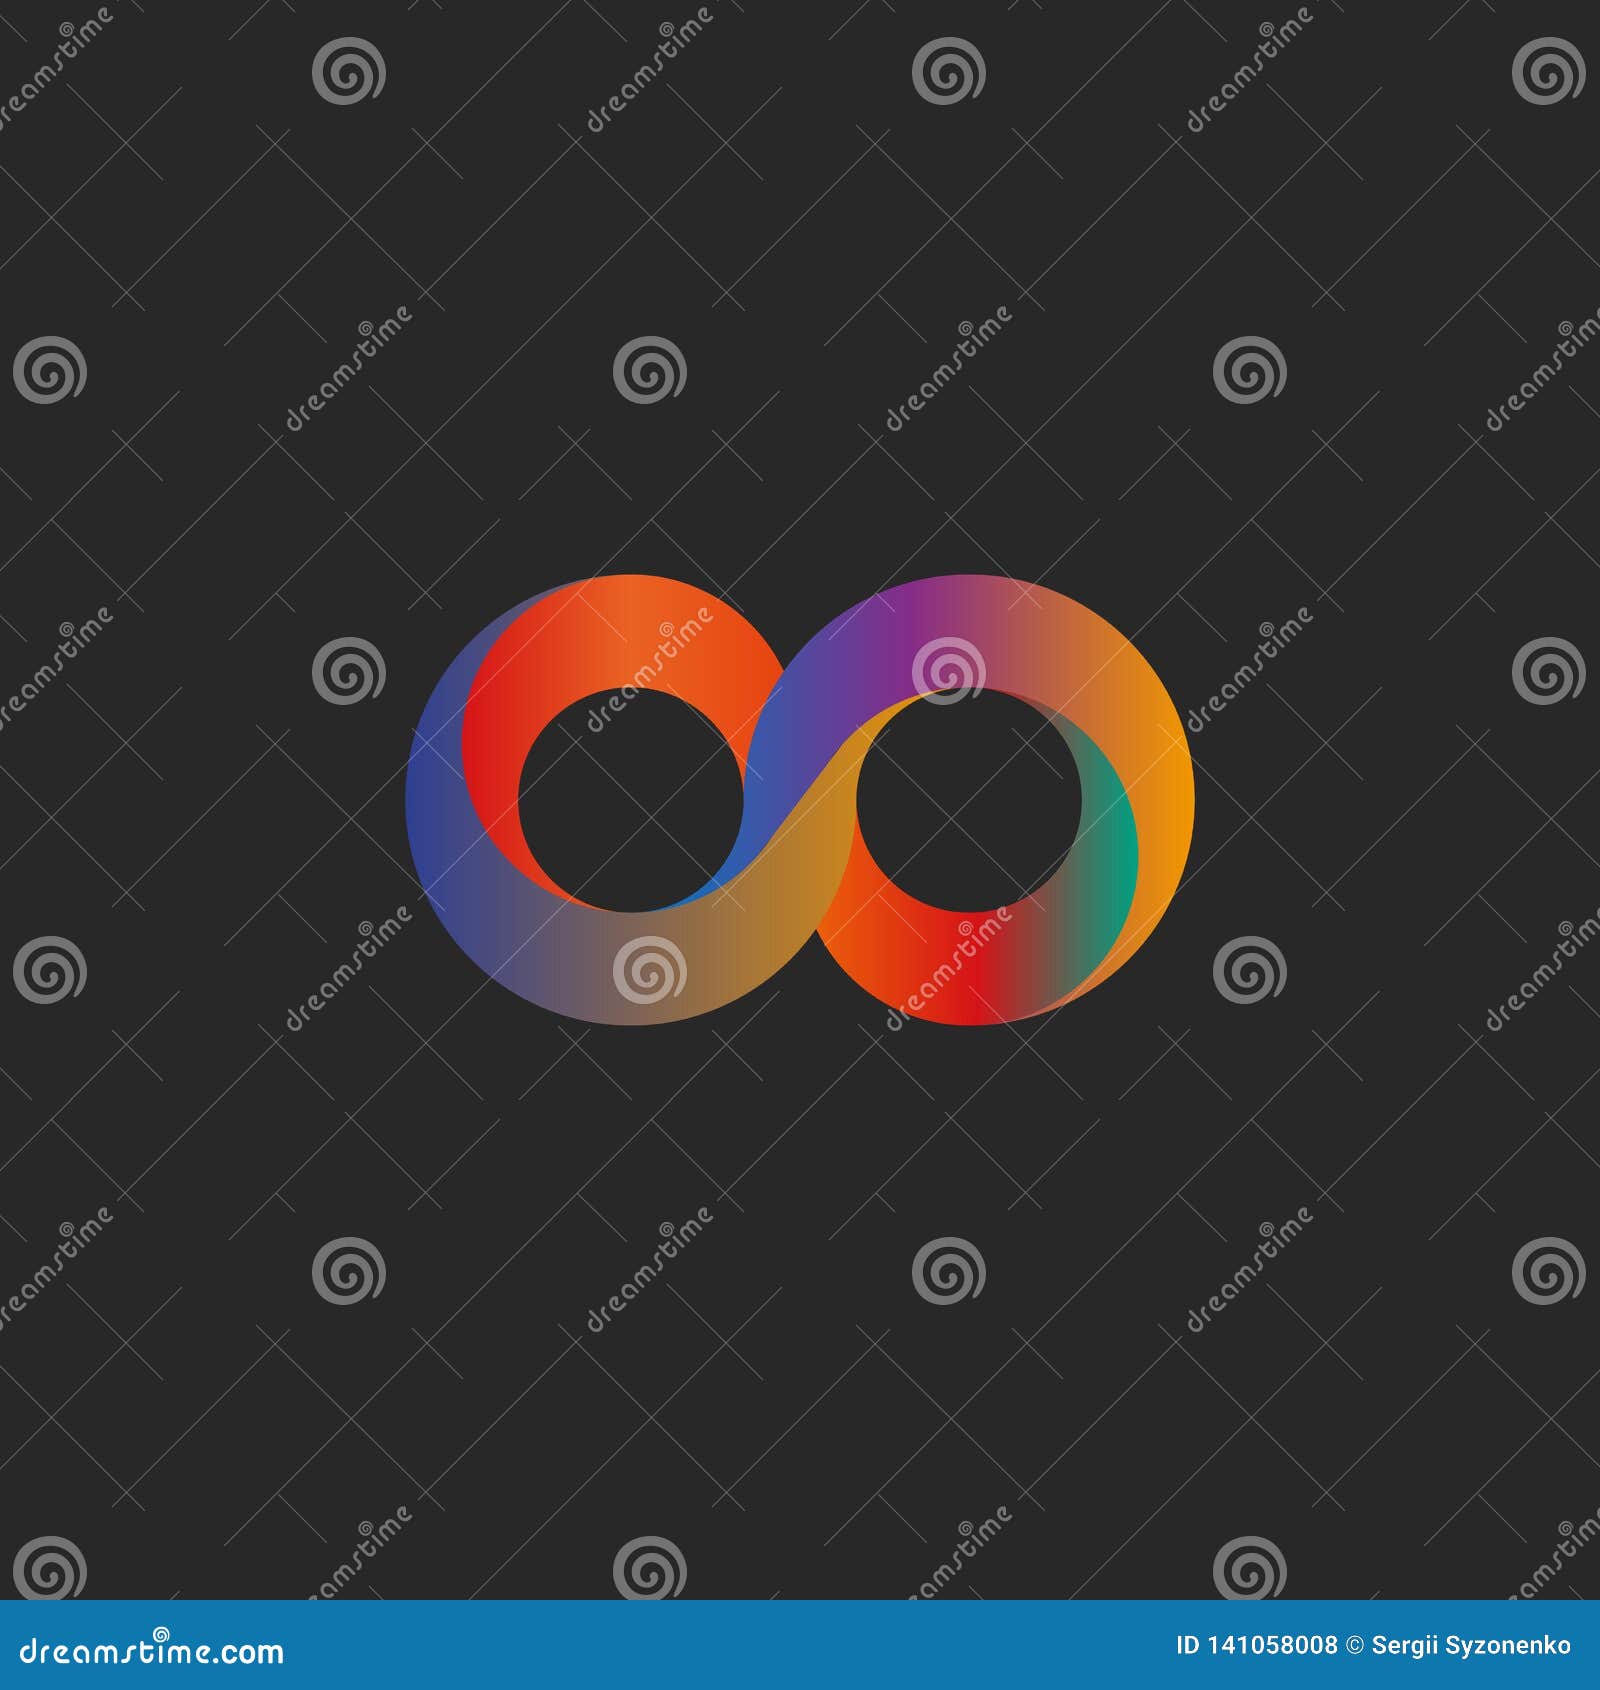 Download Infinity Symbol Geometric Shape Colorful Illusion Mockup Tech Logo Stock Vector Illustration Of Modern Concept 141058008 Yellowimages Mockups